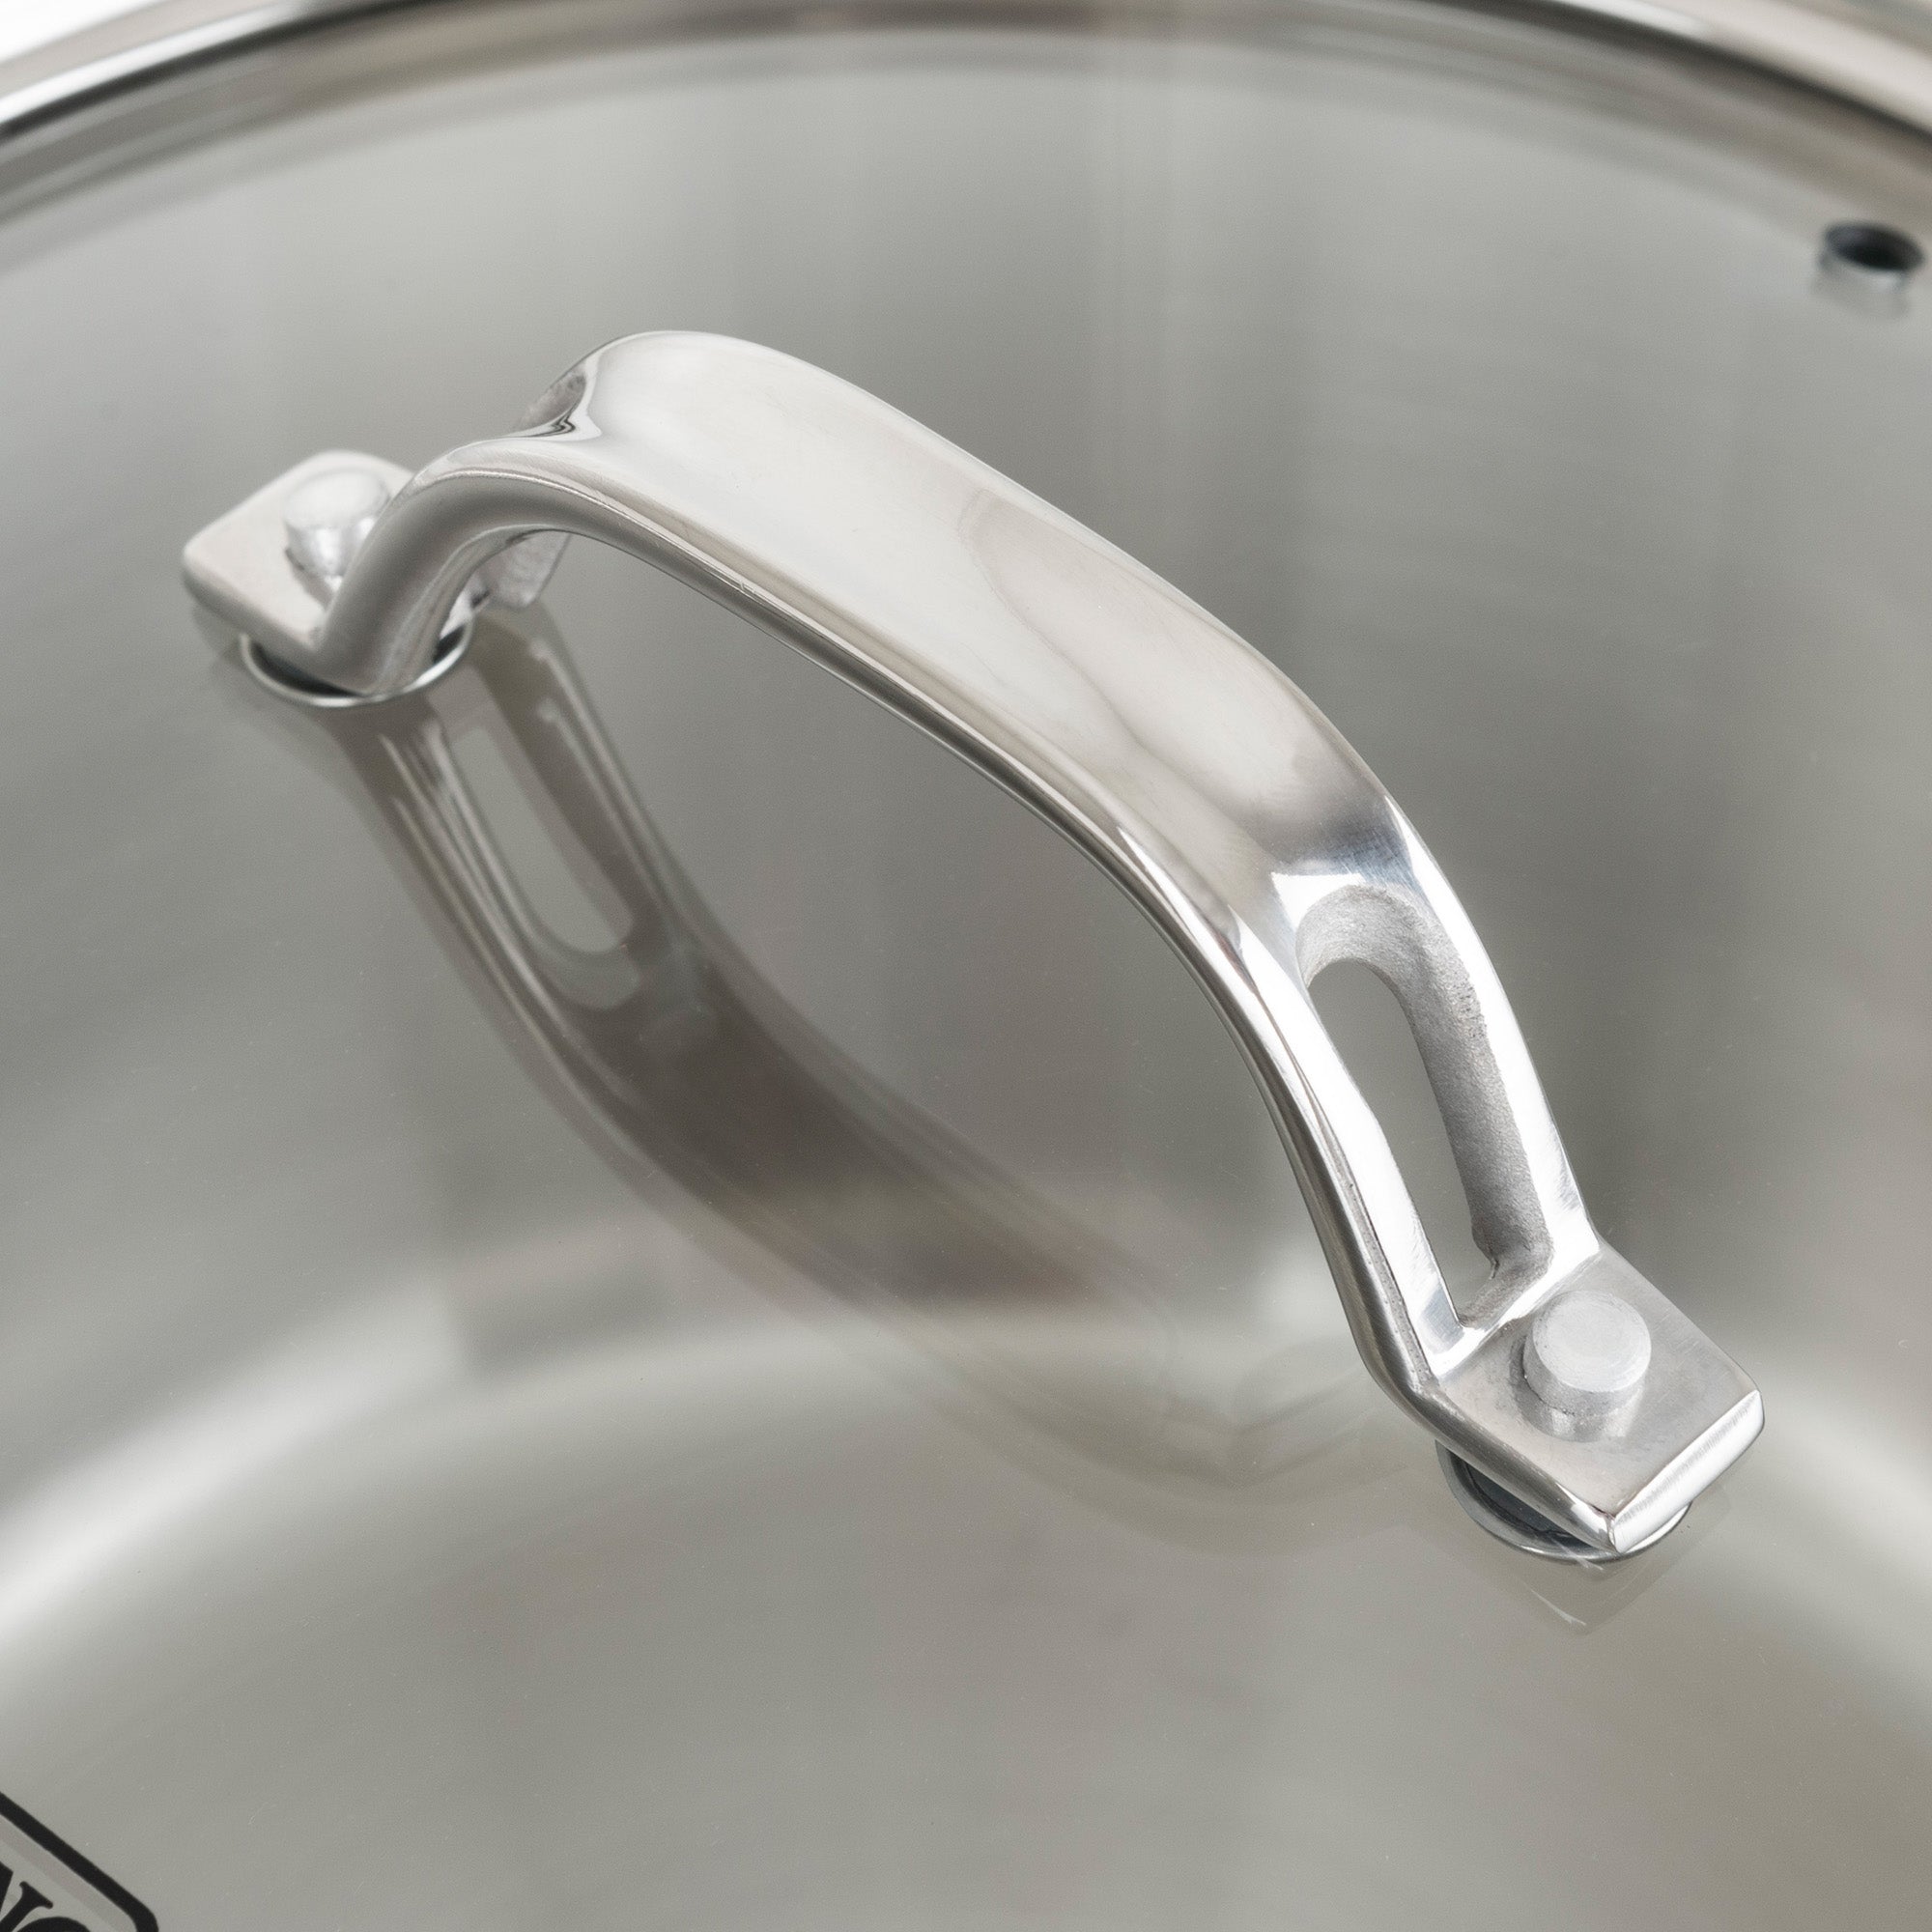 Viking Contemporary 3-Ply Stainless Steel 3.6 Quart Saute Pan with Lid